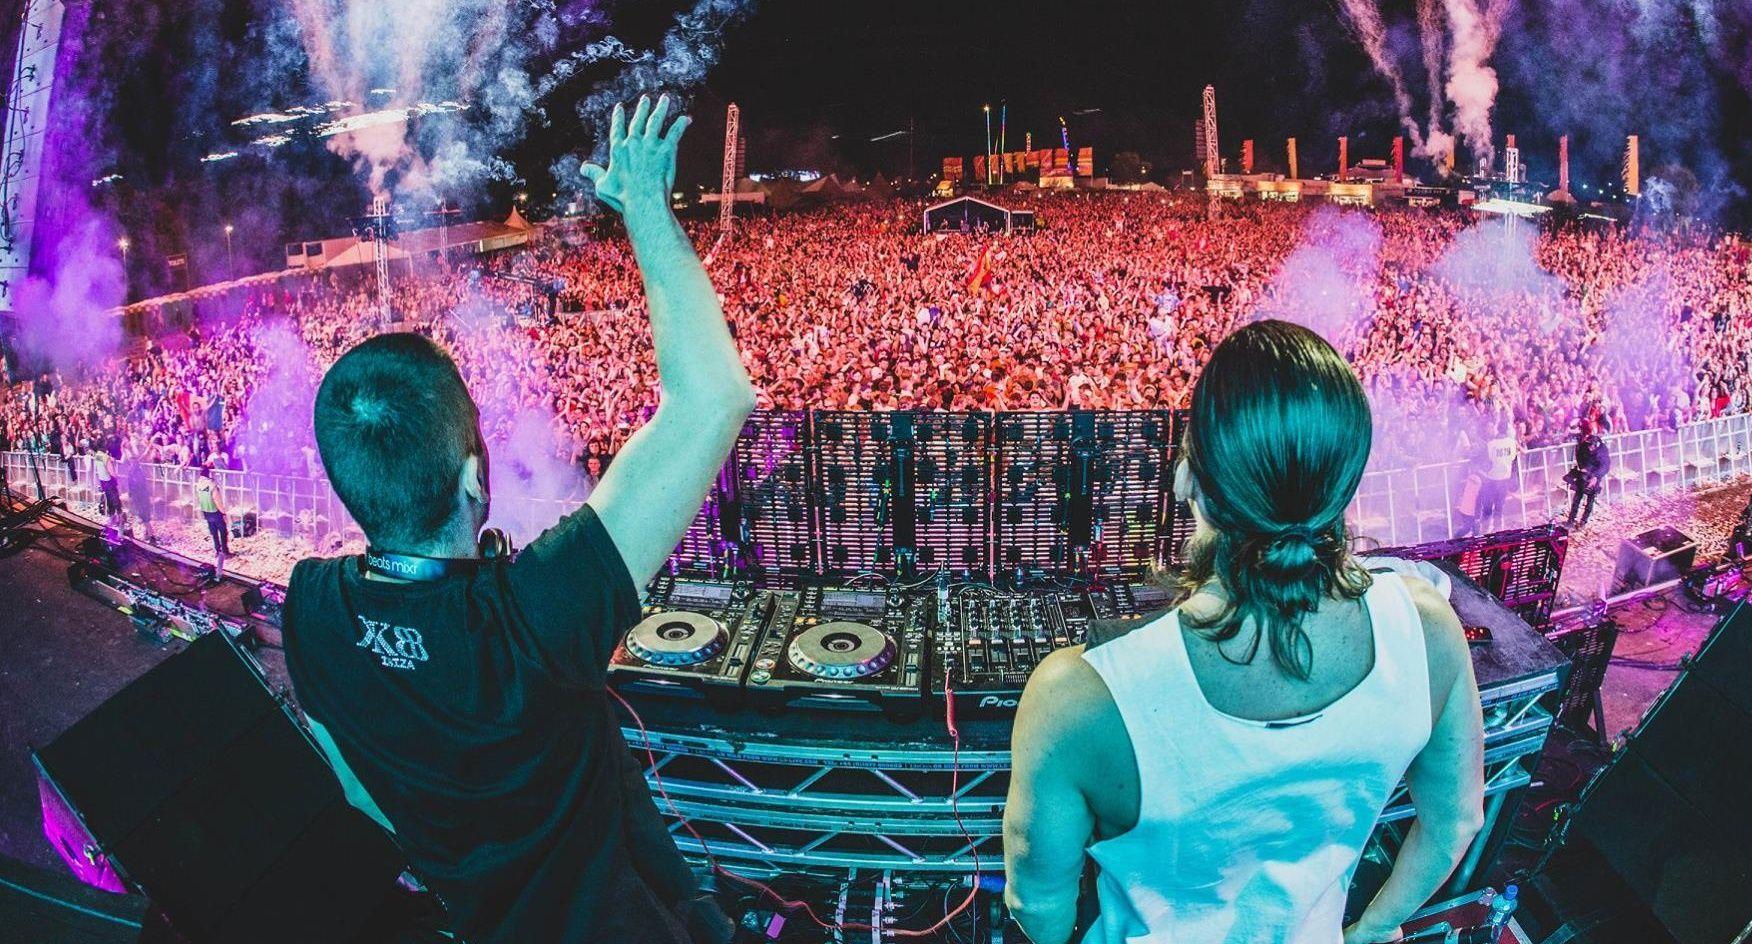 Watch Dimitri Vegas & Like Mike throw massive performance after